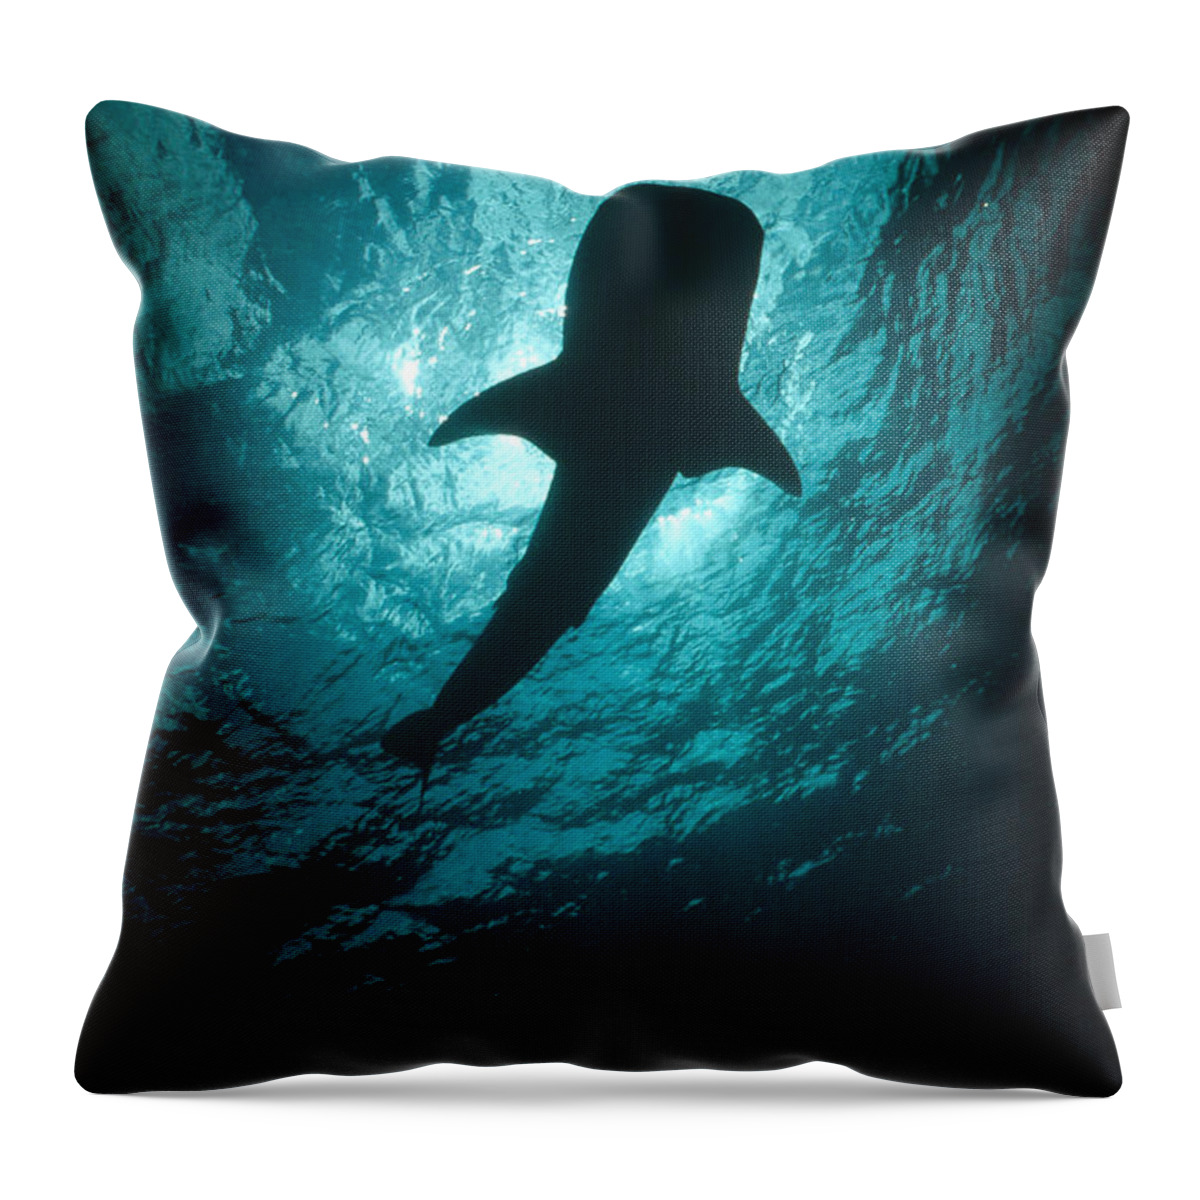 00106485 Throw Pillow featuring the photograph Whale Shark Silhouette Cocos Island by Flip Nicklin